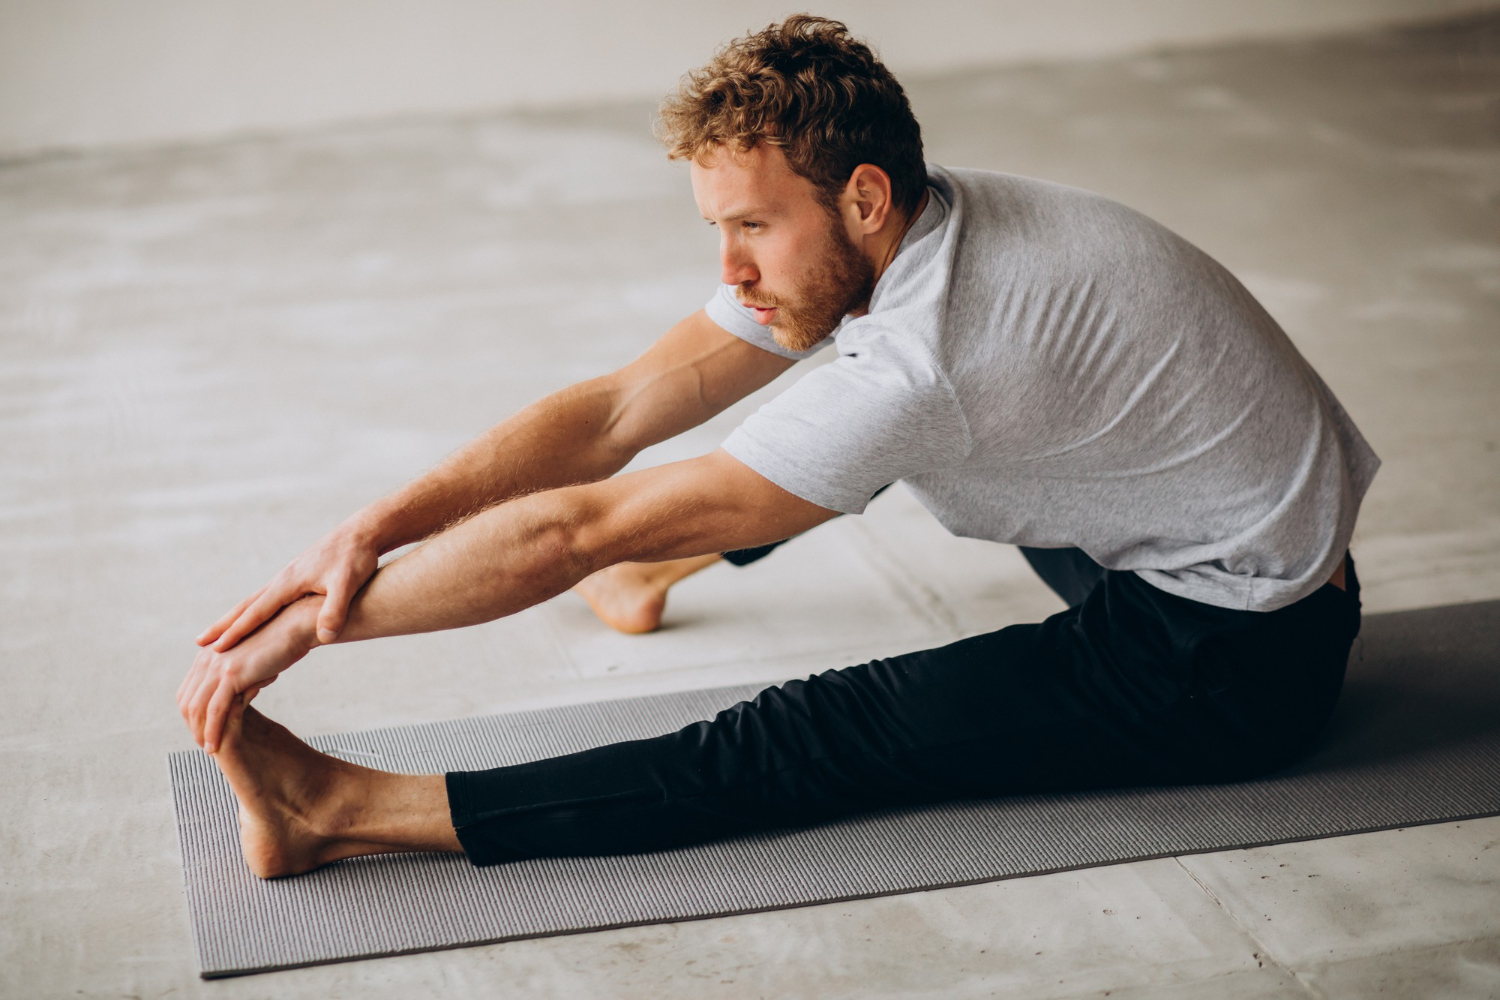 https://www.freepik.com/free-photo/man-practicing-yoga-mat-home_14923324.htm#query=man%20yoga%20home&position=5&from_view=search